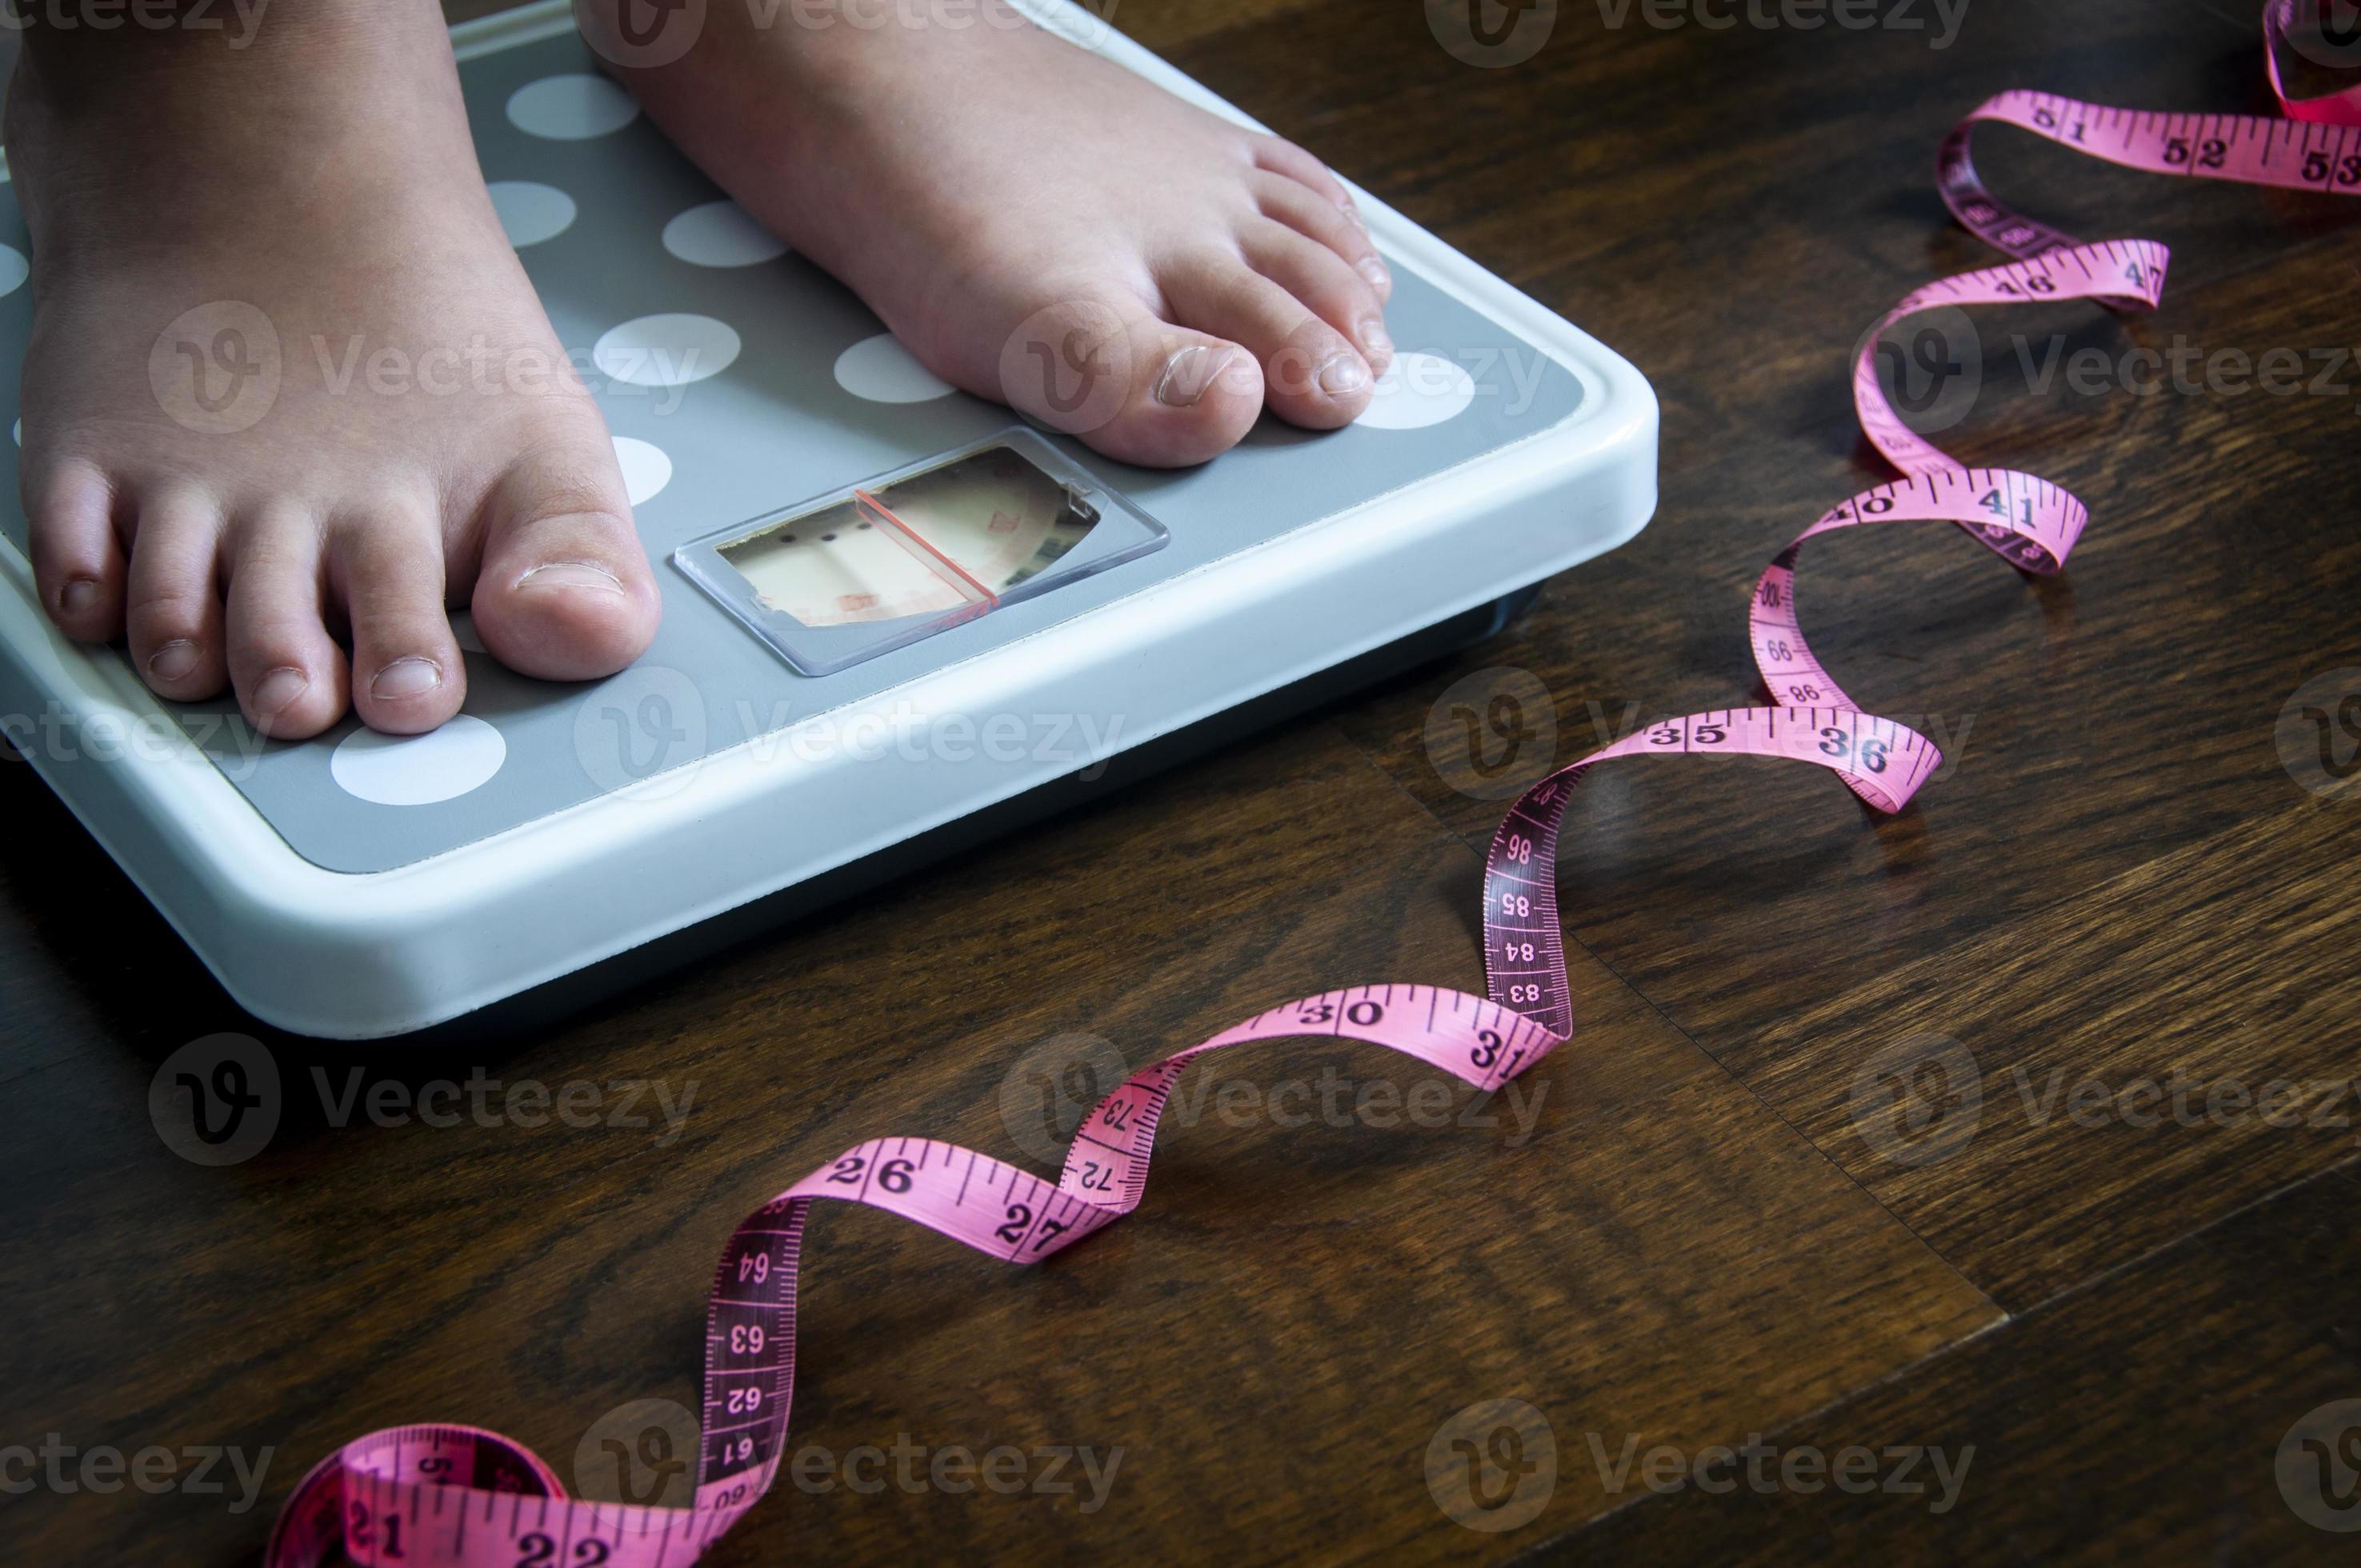 https://static.vecteezy.com/system/resources/previews/021/682/030/large_2x/side-view-of-measuring-tape-and-feet-on-weight-scale-weight-loss-concept-photo.jpg